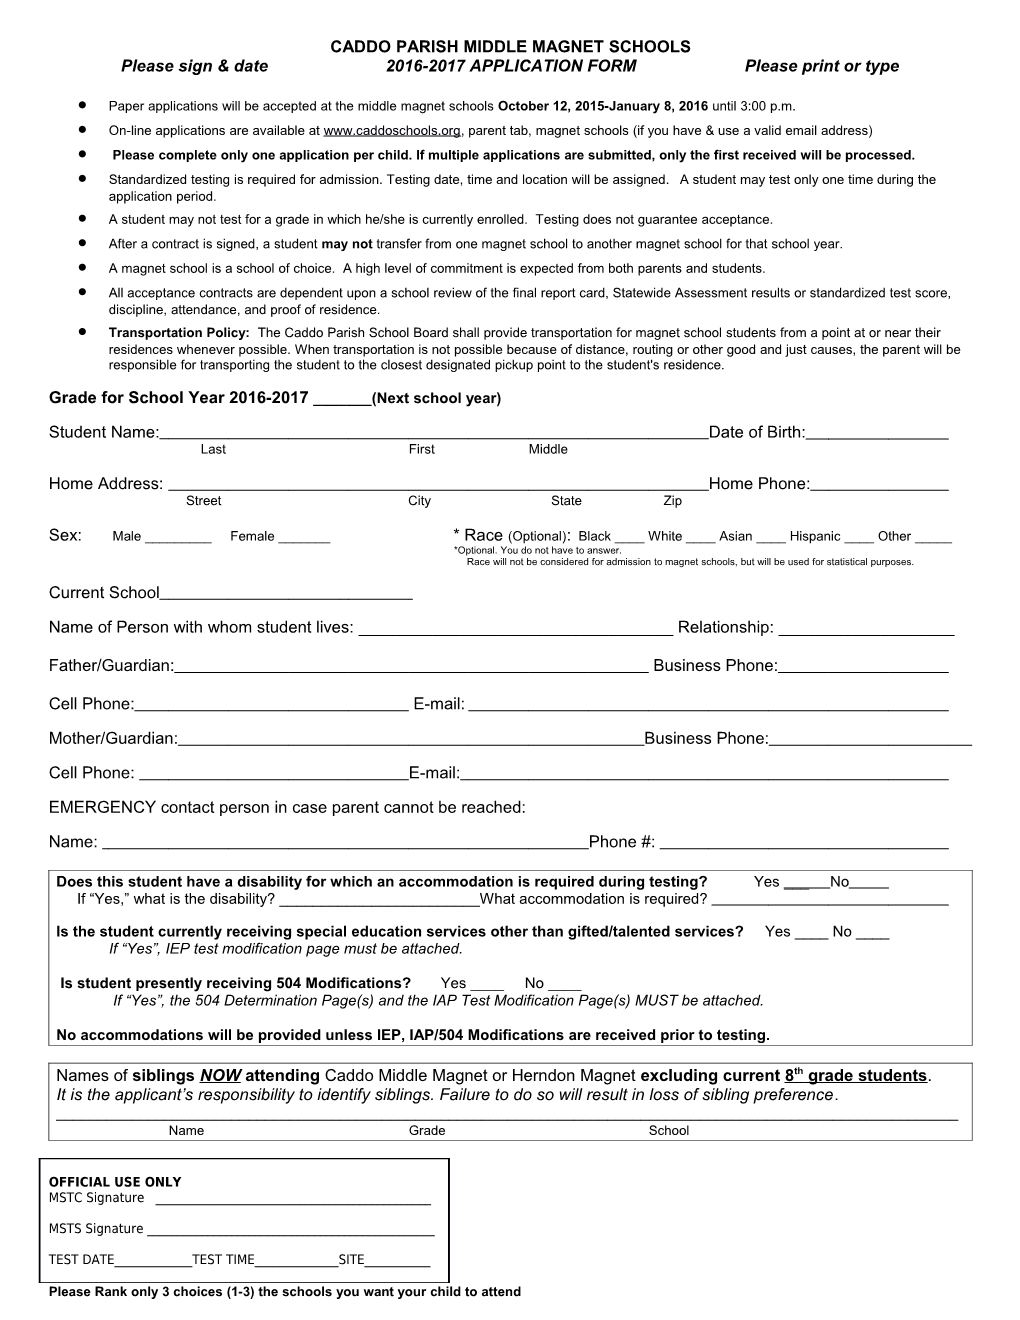 Paper Applications Will Be Accepted at the Middle Magnet Schools October 12, 2015-January